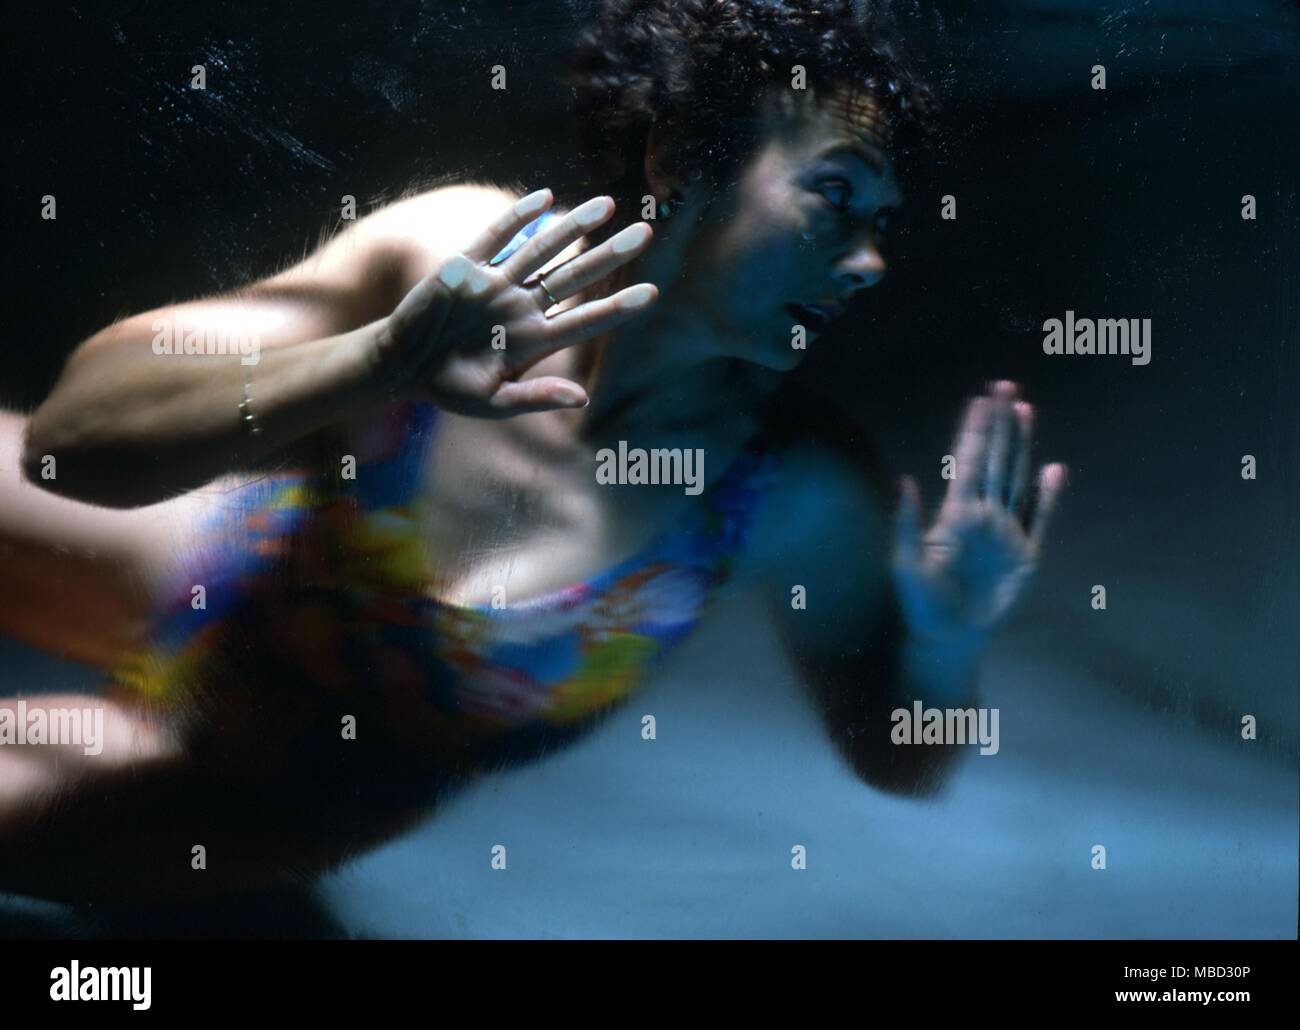 Stage Magic - Drowning Girl. Girl in swimming costume, locked in a glass cabinet which is rapidly filling with water. Apparently she has no escape. Stock Photo